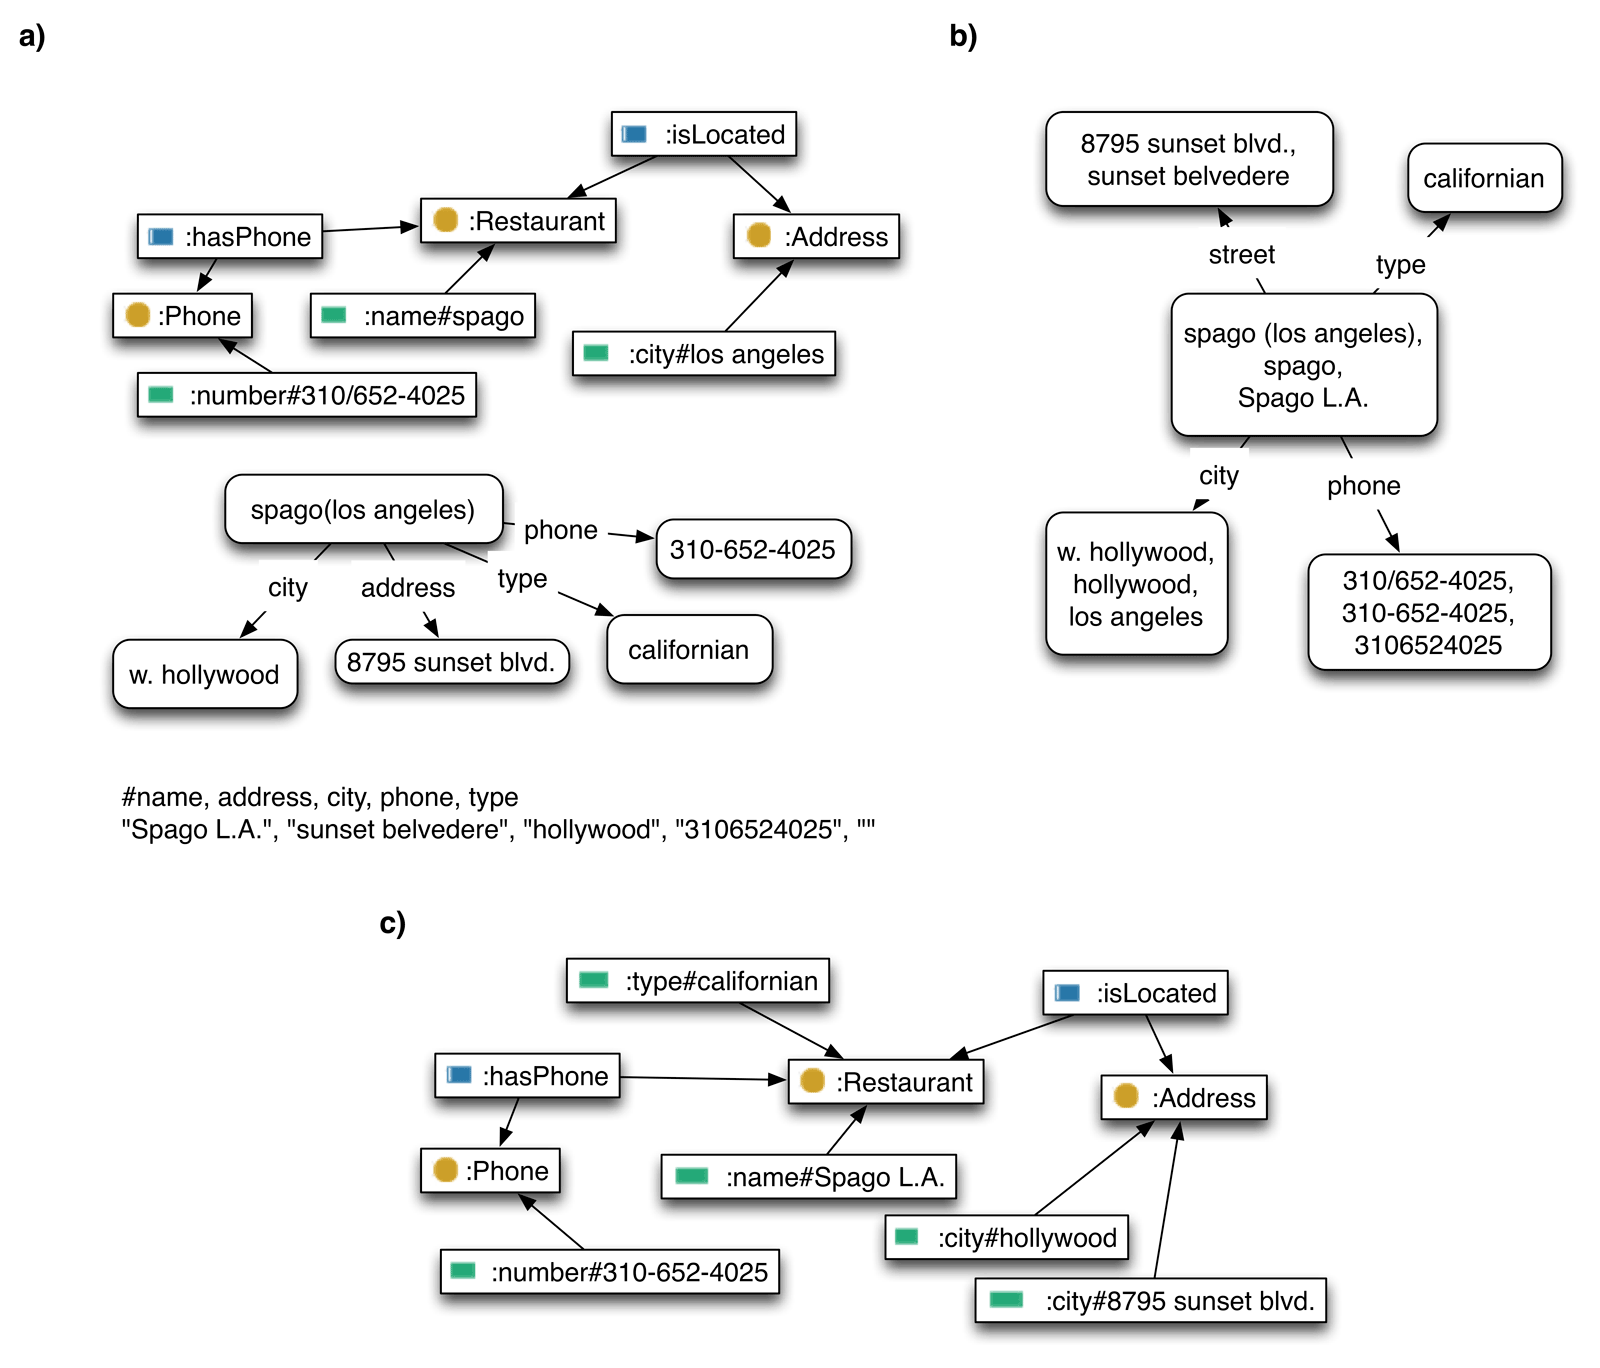 Entity resolution and redundancy elimination on three knowledge chunks (see Section 3.2). a) Input data in a form of ontology (see Figure 3.2), network and attribute values. b) Cluster network obtained with entity resolution (i.e. matching). c) Final ontology obtained after redundancy elimination and appropriate postprocessing.